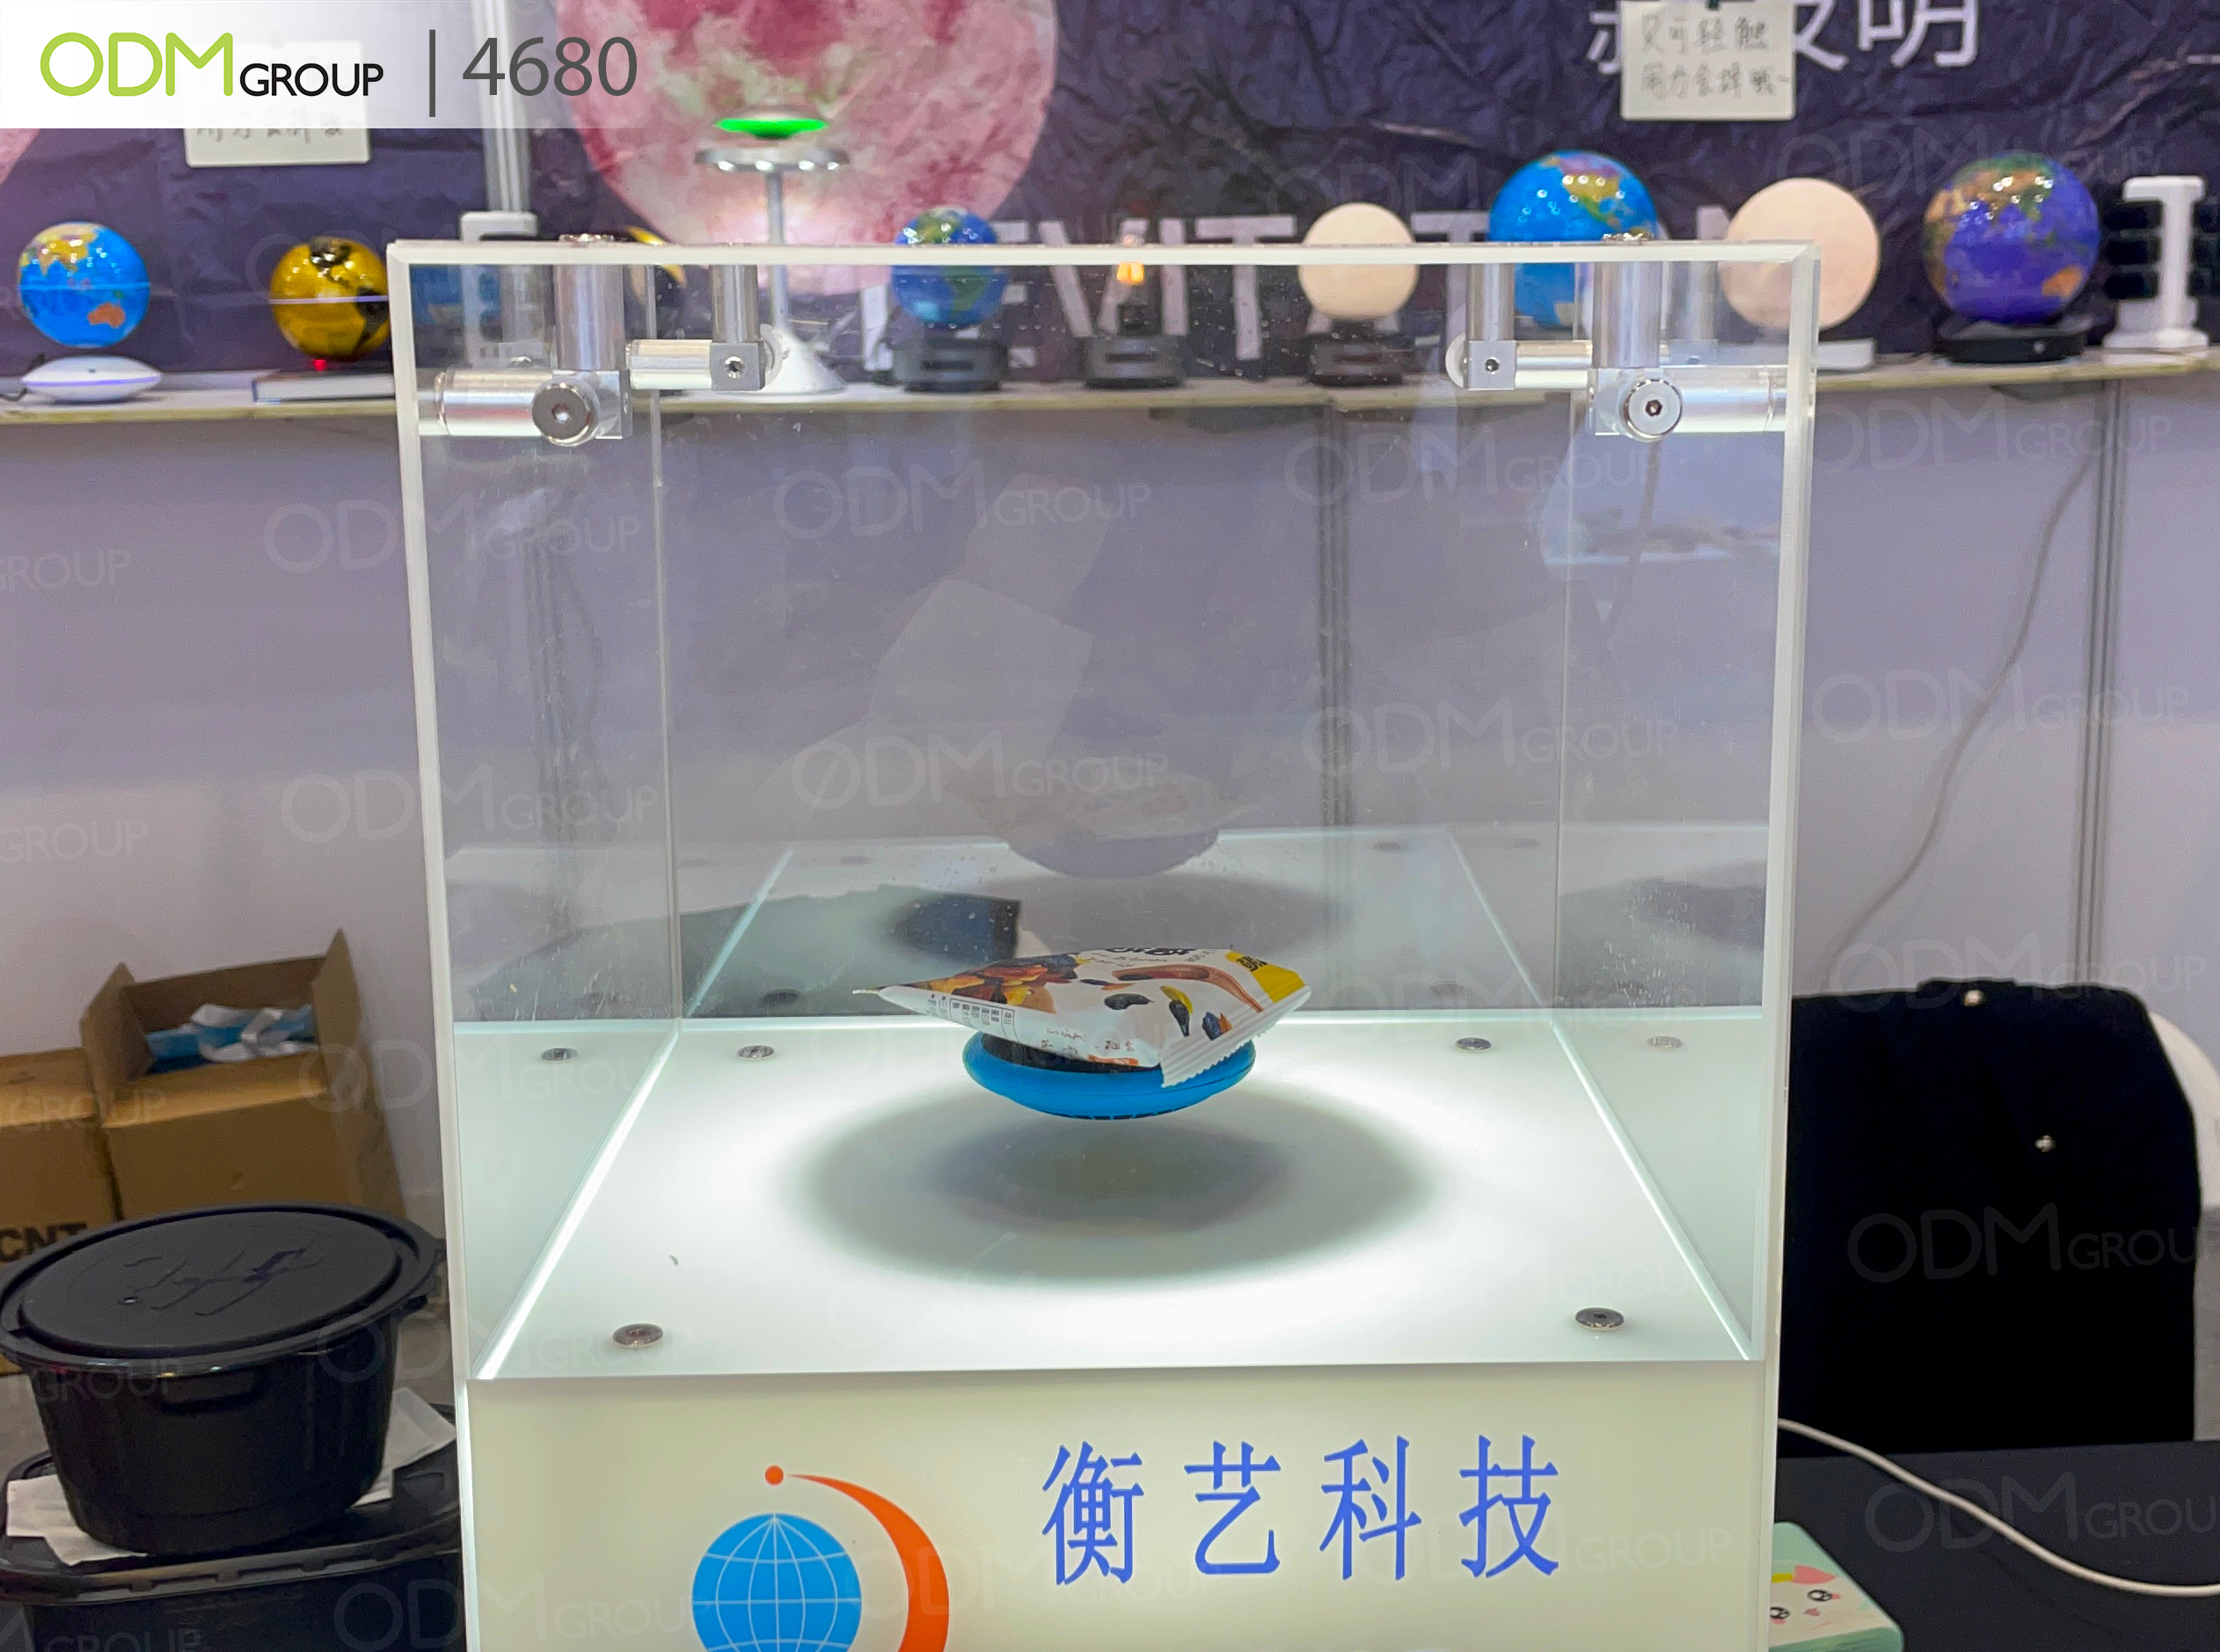 How to Maximise Product Presentation w/ a Magnetic Levitation Display?